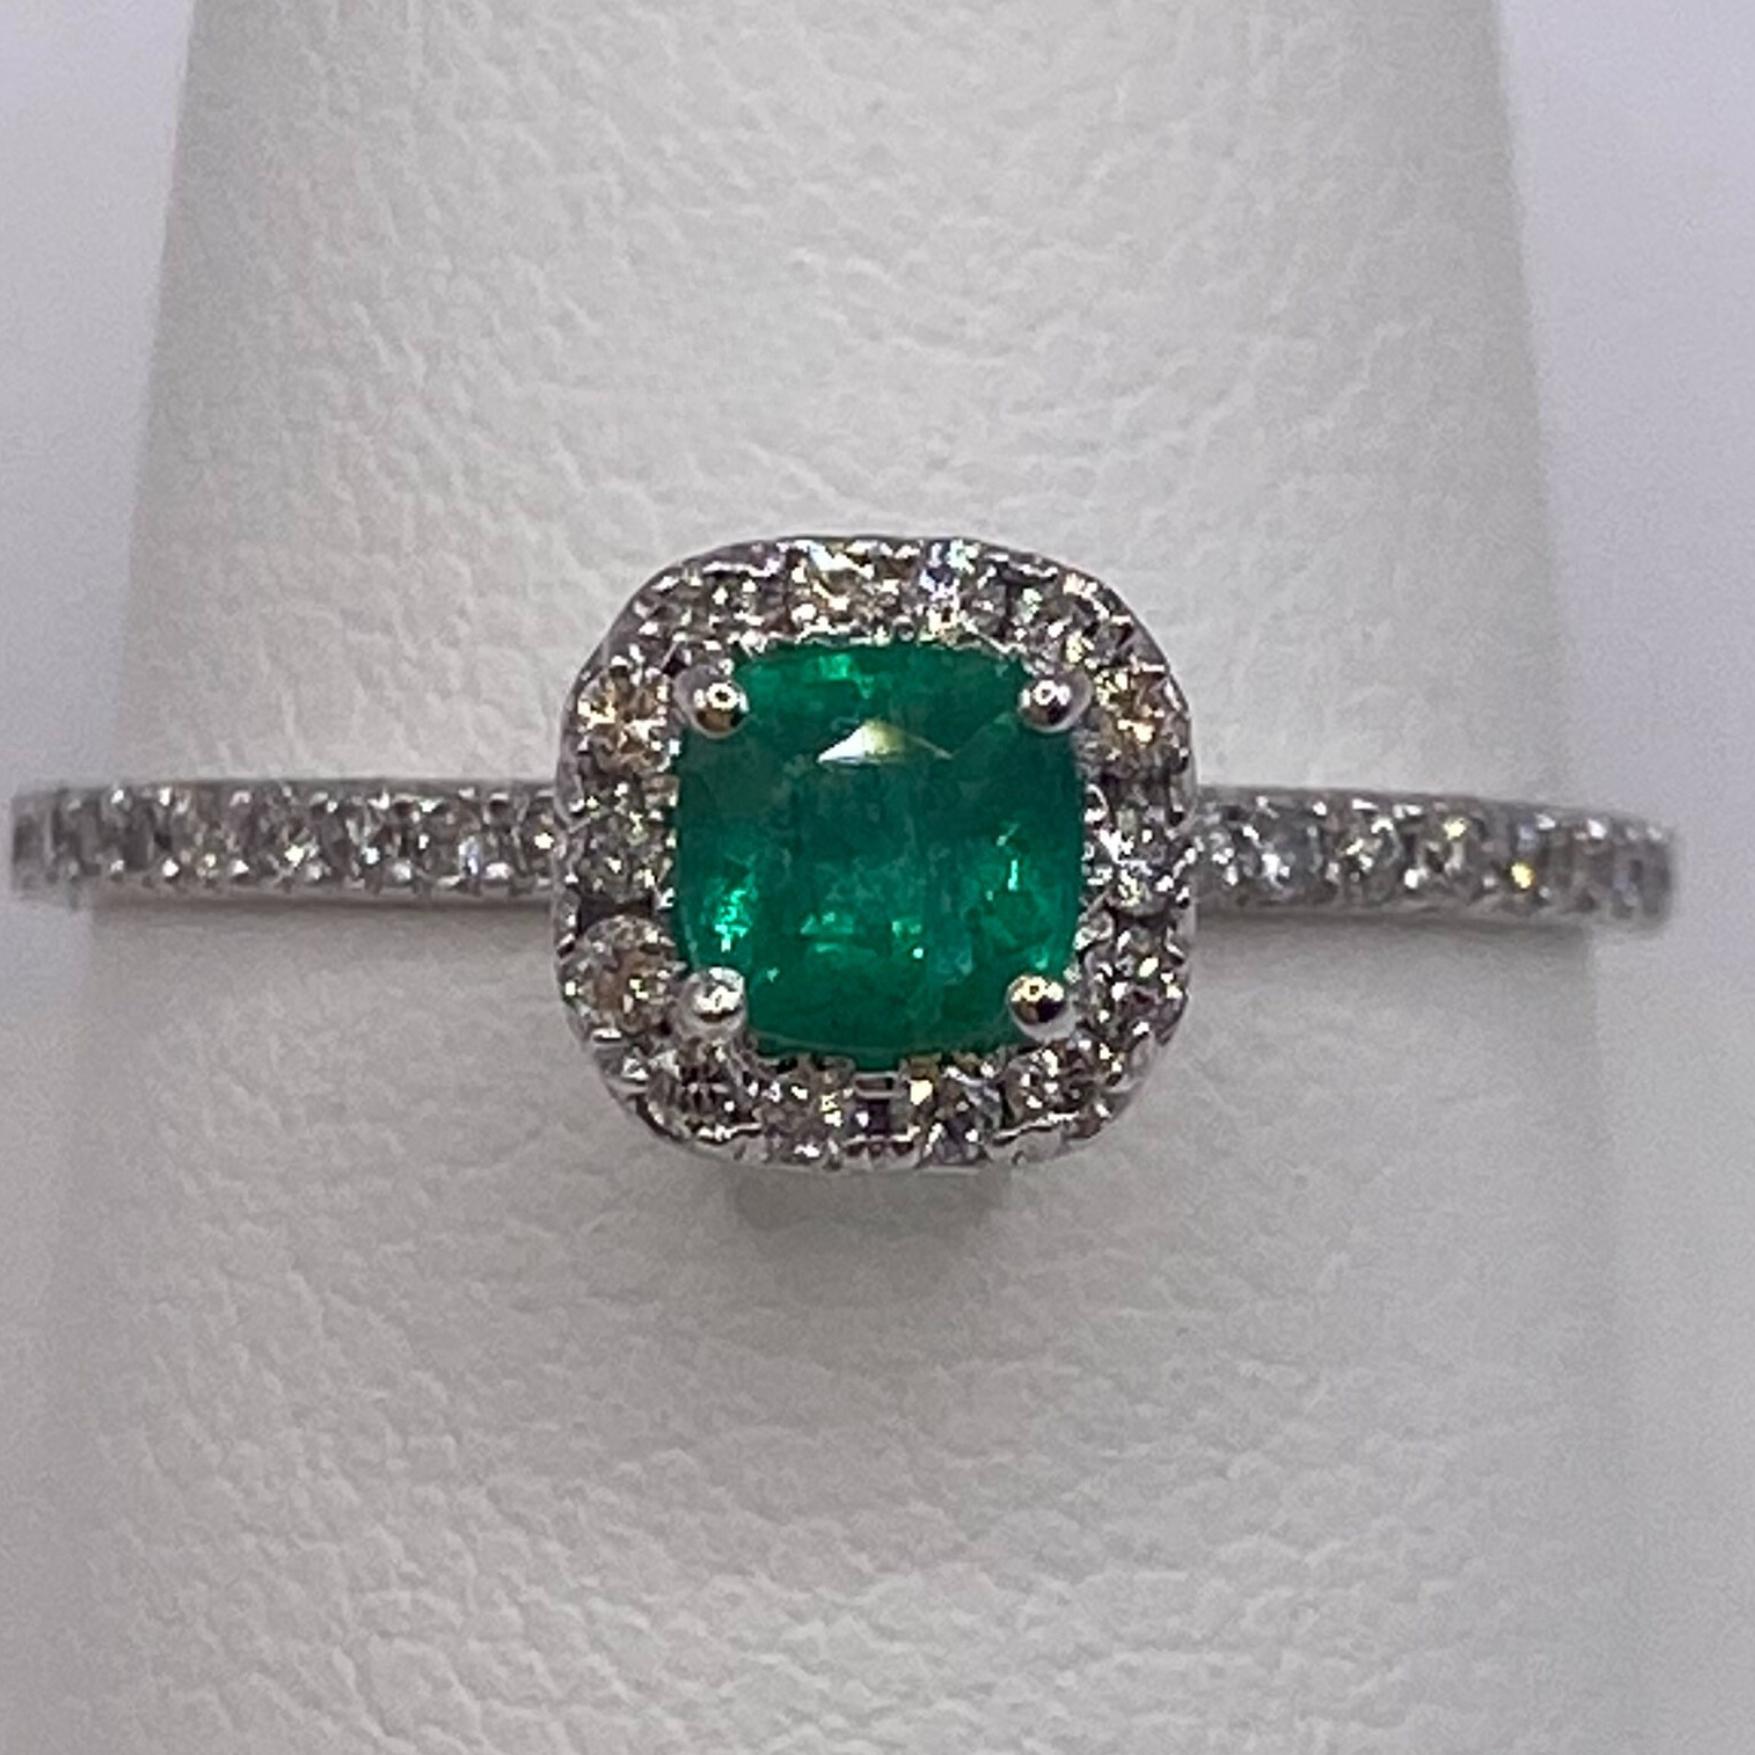 Metal: 14KT White Gold
Finger Size: 6.75
Band Width: 1.4mm

(Ring is size 6.75, but is sizable upon request)

Number of Cushion Cut Emeralds: 1
Carat Weight: 0.35ctw
Stone Size: 4.15mm

Number of Diamonds: 38
Carat Weight: 0.24ctw